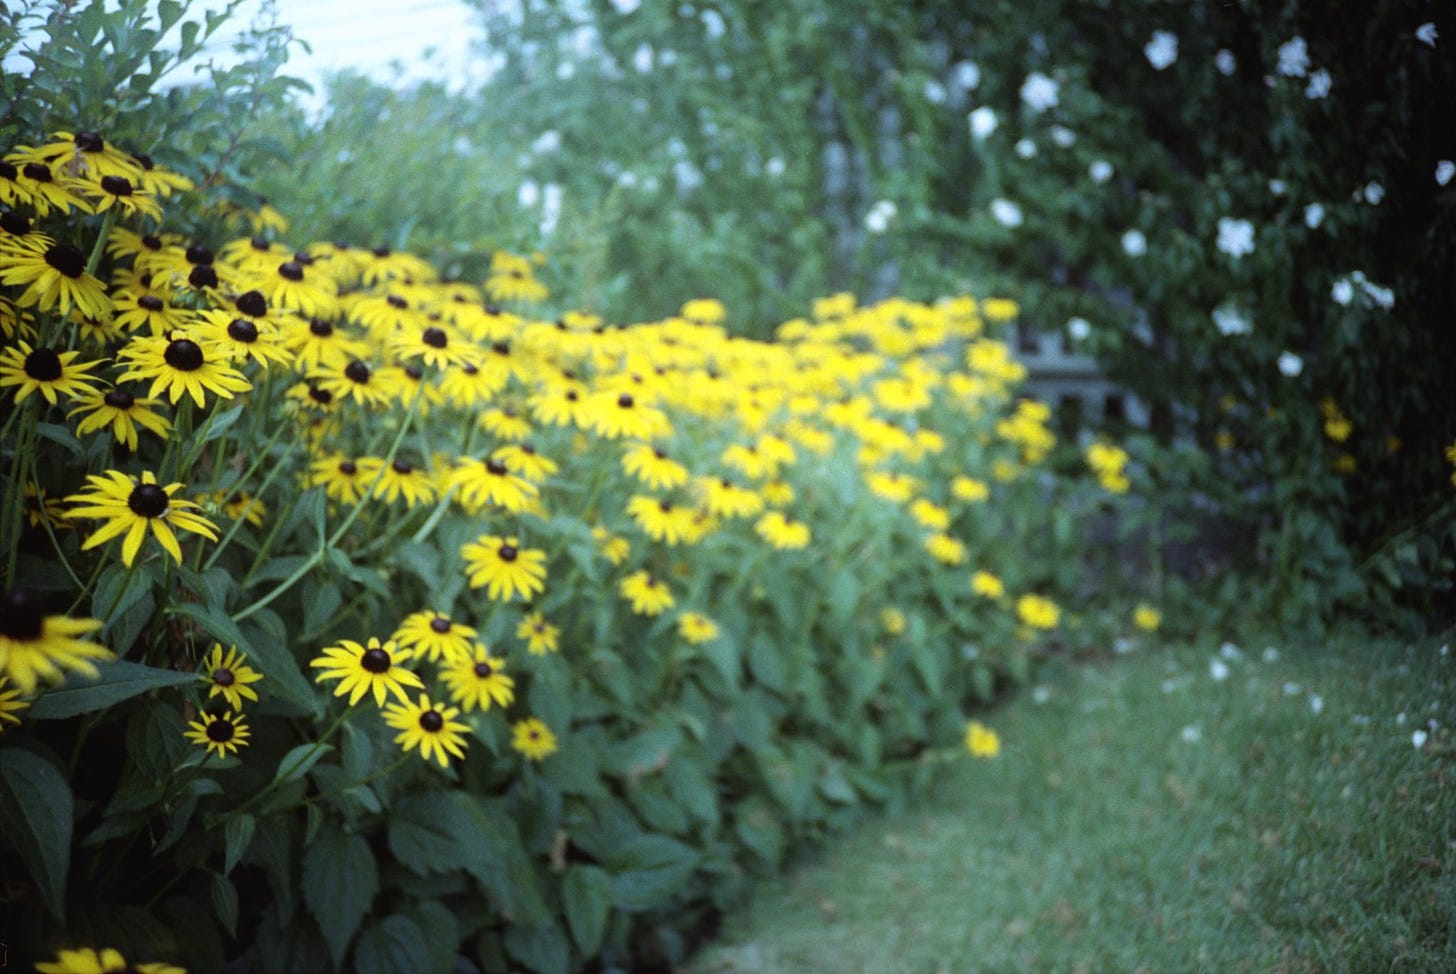 A row of yellow flowers, partially in focus and partially out of focus.